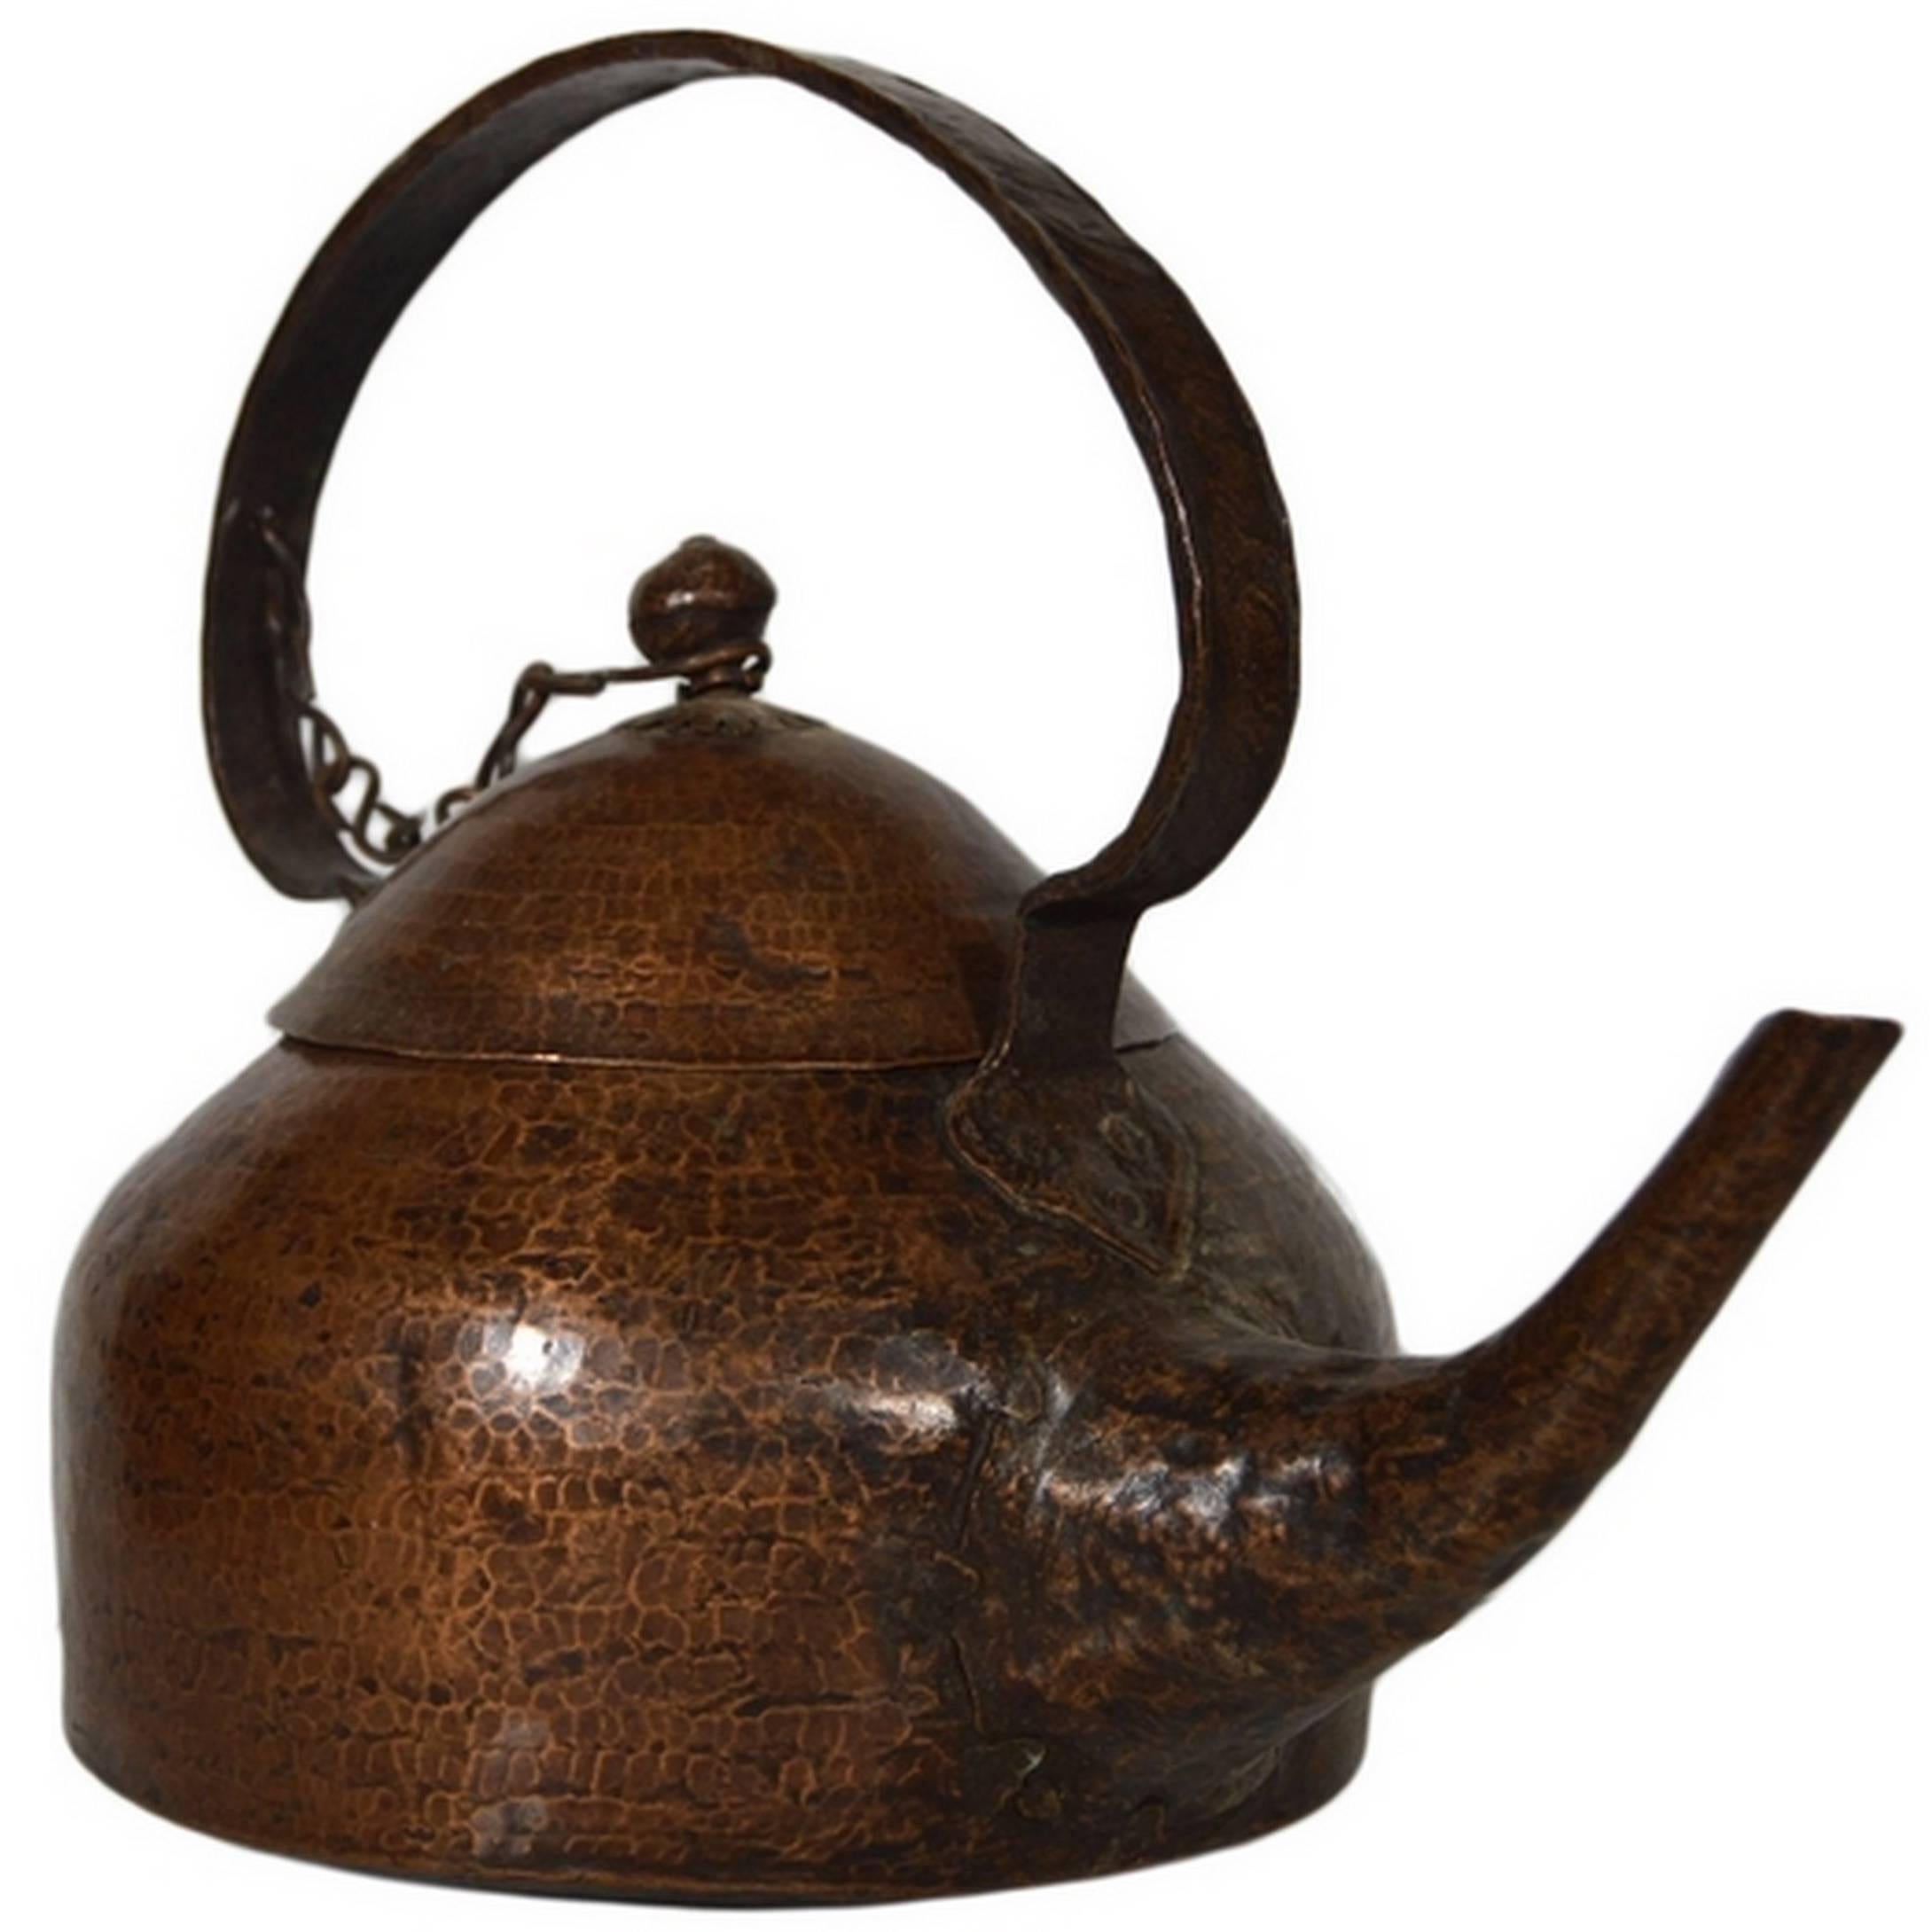 Vintage Hand-Hammered Copper Teapot with Patina from 20th Century, India